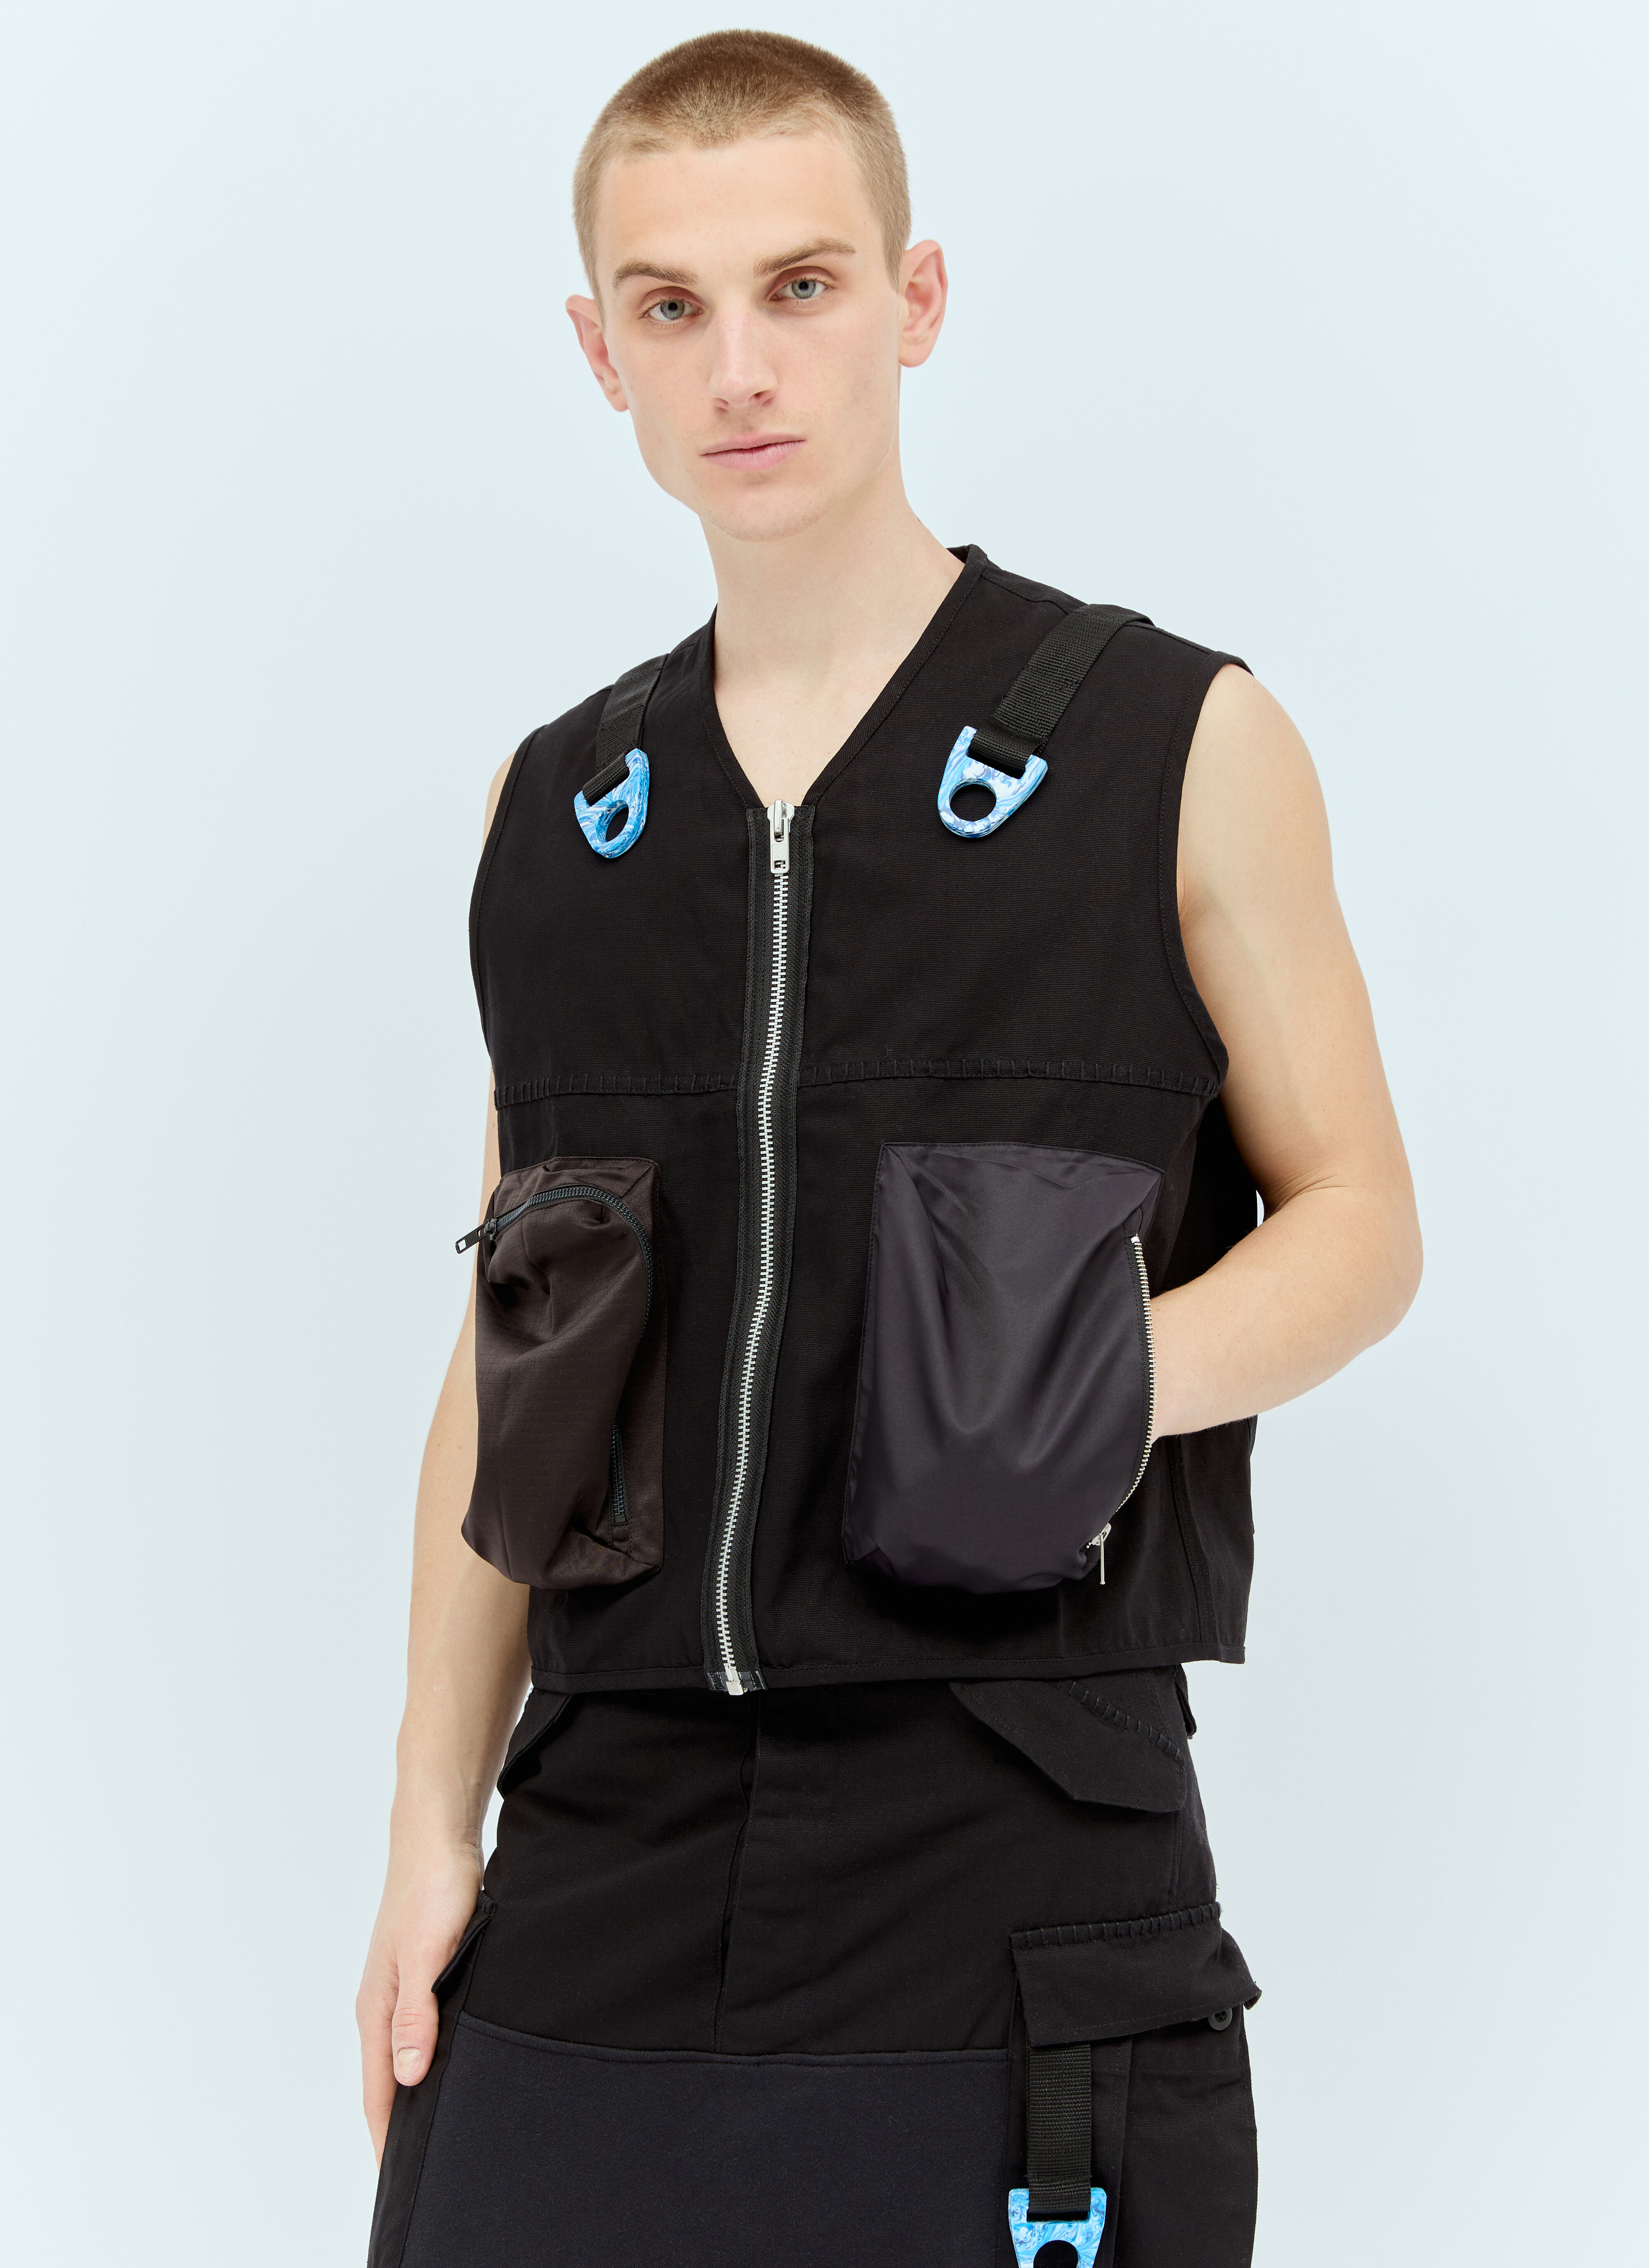 Rick Owens Utility Recycled Vest Black ric0155013